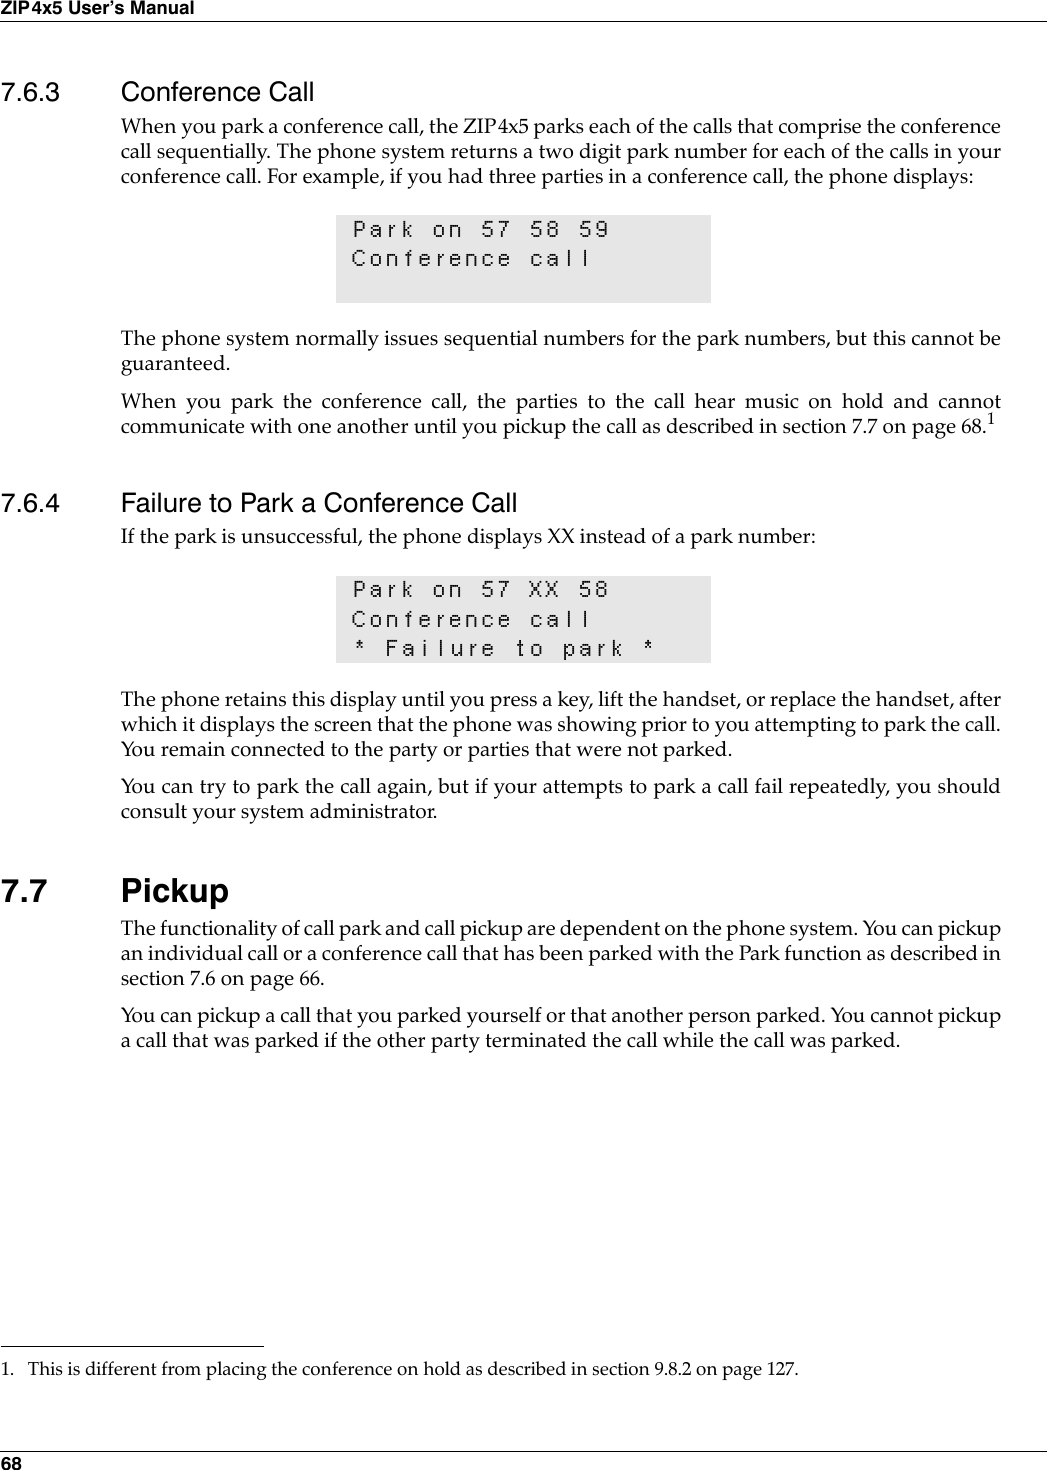 68ZIP4x5 User’s Manual7.6.3 Conference CallWhen you park a conference call, the ZIP4x5 parks each of the calls that comprise the conferencecall sequentially. The phone system returns a two digit park number for each of the calls in yourconference call. For example, if you had three parties in a conference call, the phone displays:The phone system normally issues sequential numbers for the park numbers, but this cannot beguaranteed.When you park the conference call, the parties to the call hear music on hold and cannotcommunicate with one another until you pickup the call as described in section 7.7 on page 68.17.6.4 Failure to Park a Conference CallIf the park is unsuccessful, the phone displays XX instead of a park number:The phone retains this display until you press a key, lift the handset, or replace the handset, afterwhich it displays the screen that the phone was showing prior to you attempting to park the call.You remain connected to the party or parties that were not parked.You can try to park the call again, but if your attempts to park a call fail repeatedly, you shouldconsult your system administrator.7.7 PickupThe functionality of call park and call pickup are dependent on the phone system. You can pickupan individual call or a conference call that has been parked with the Park function as described insection 7.6 on page 66. You can pickup a call that you parked yourself or that another person parked. You cannot pickupa call that was parked if the other party terminated the call while the call was parked.Park on 57 58 59Conference call1. This is different from placing the conference on hold as described in section 9.8.2 on page 127.Park on 57 XX 58Conference call* Failure to park *